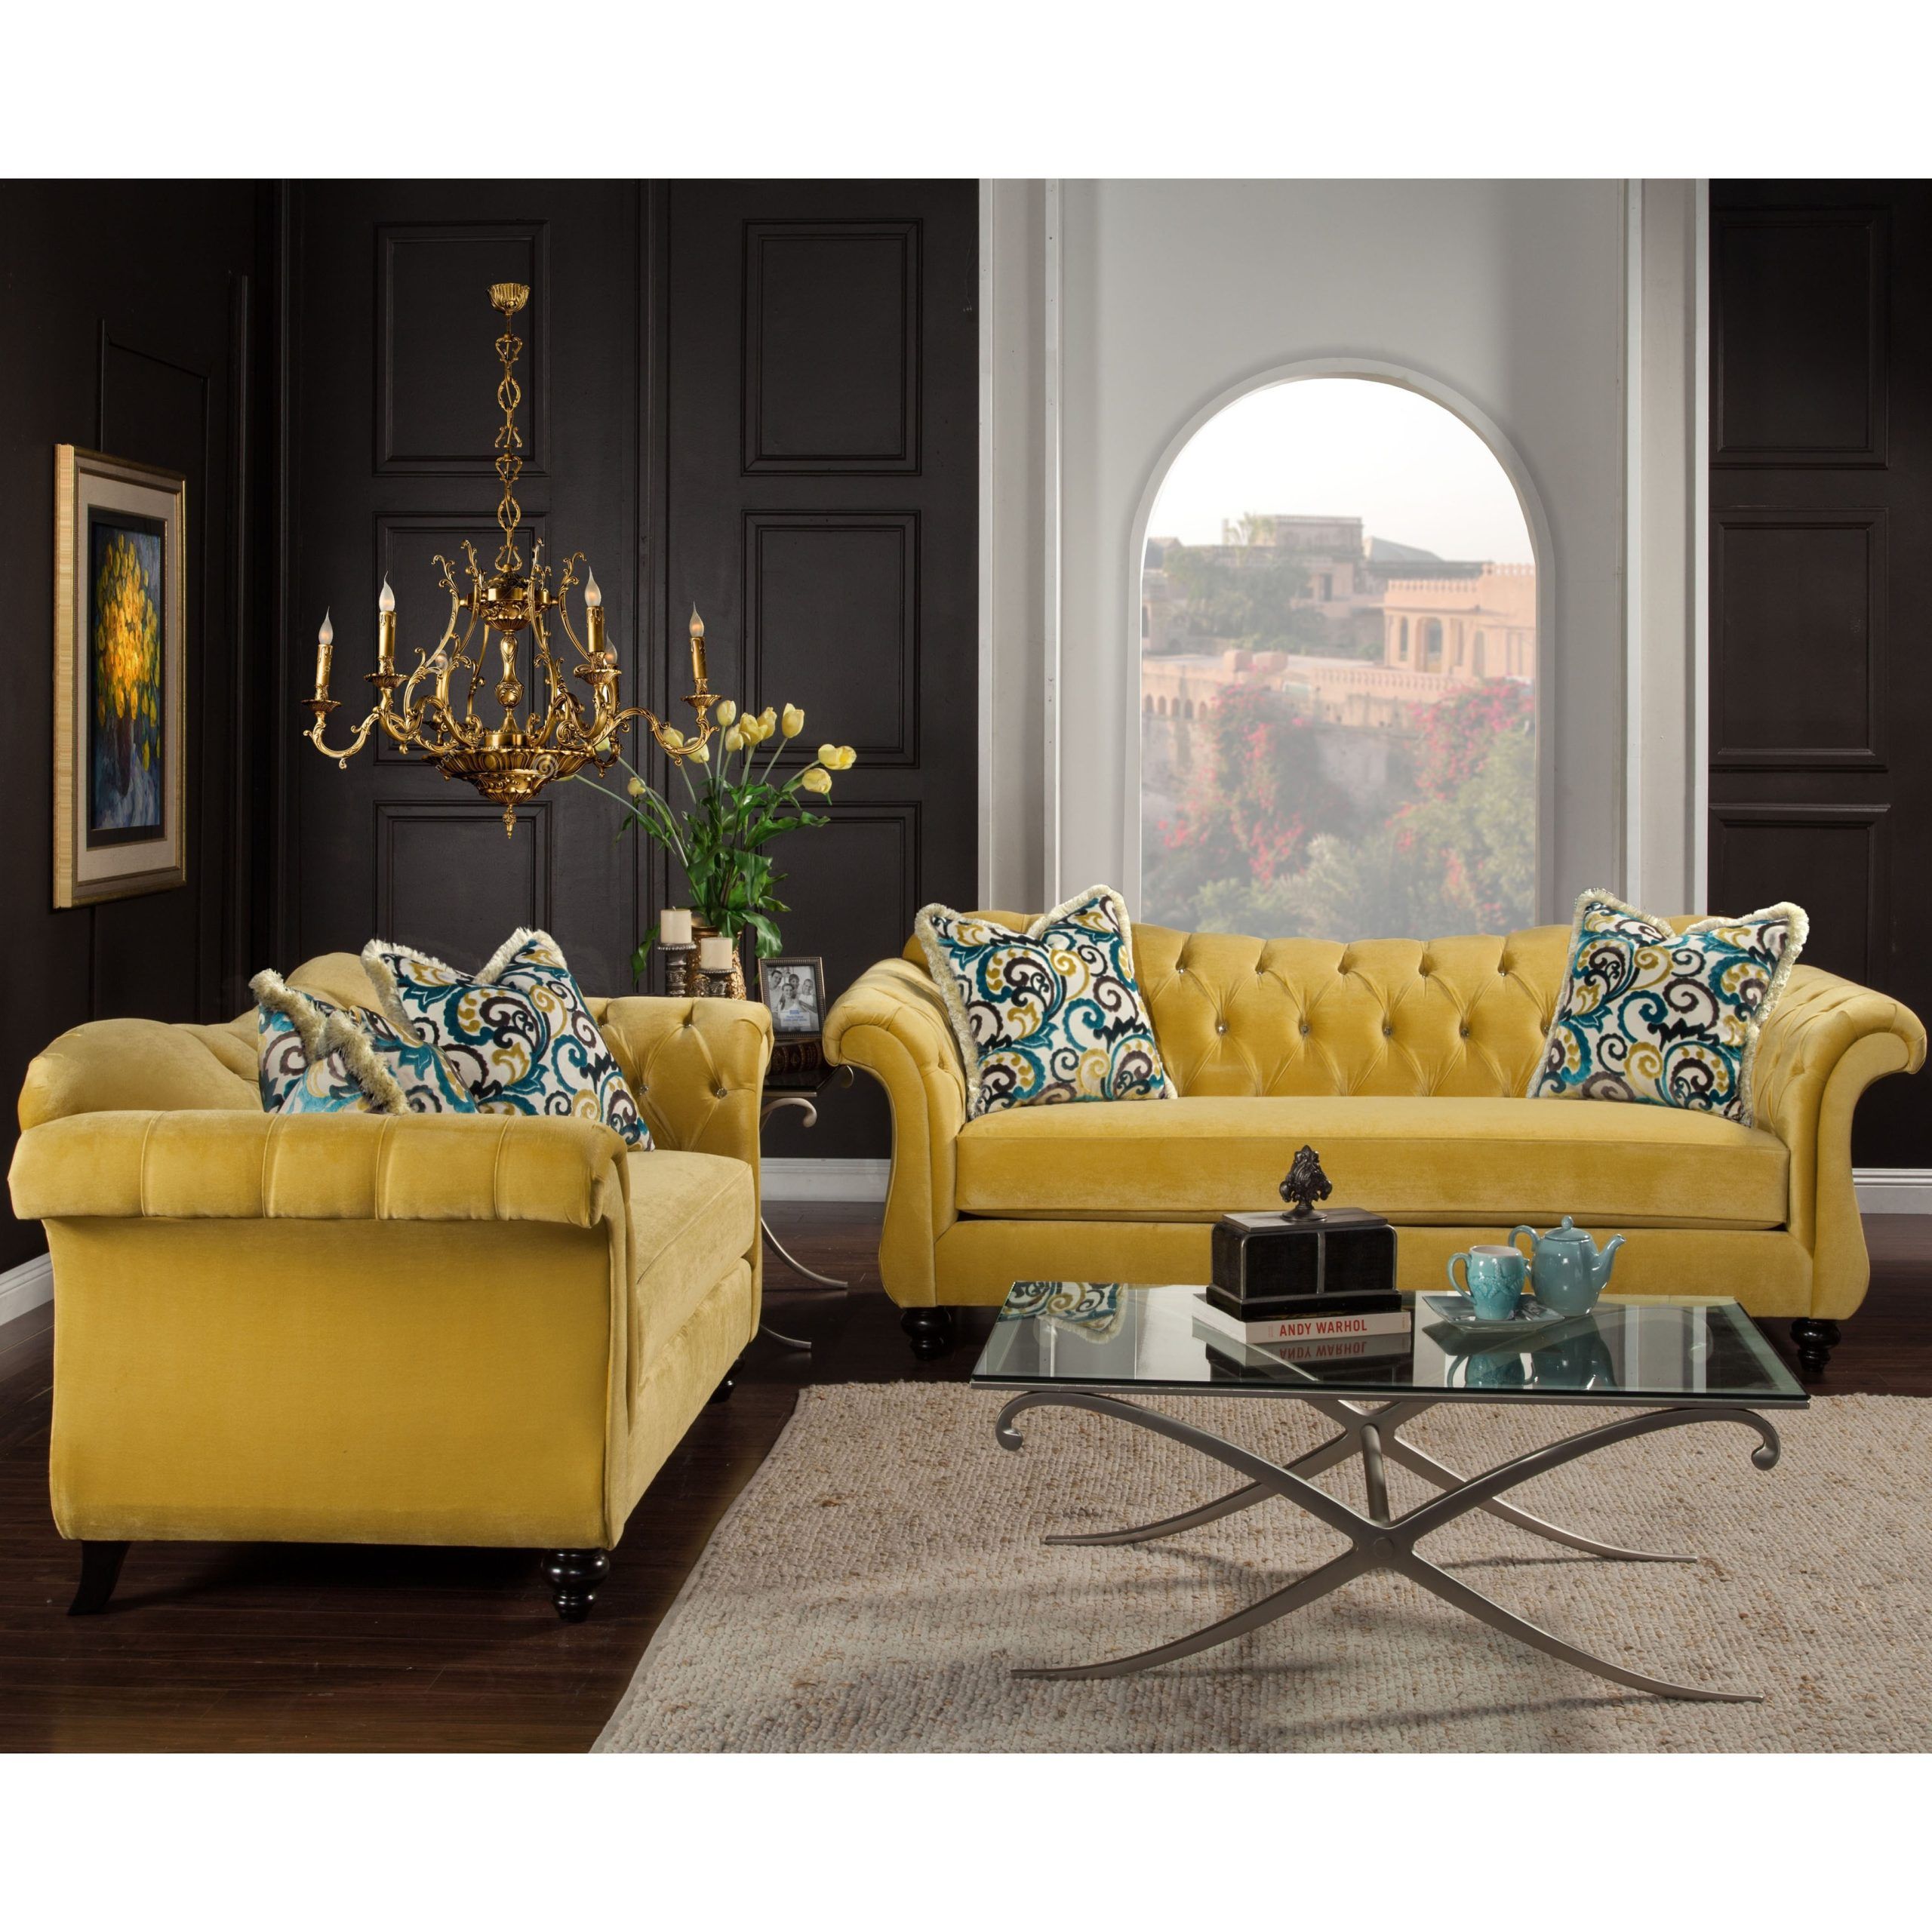 Furniture Of America Agatha 2 Piece Tufted Velvet And Hardwood Sofa And Pertaining To Sofas In Multiple Colors (Gallery 7 of 20)